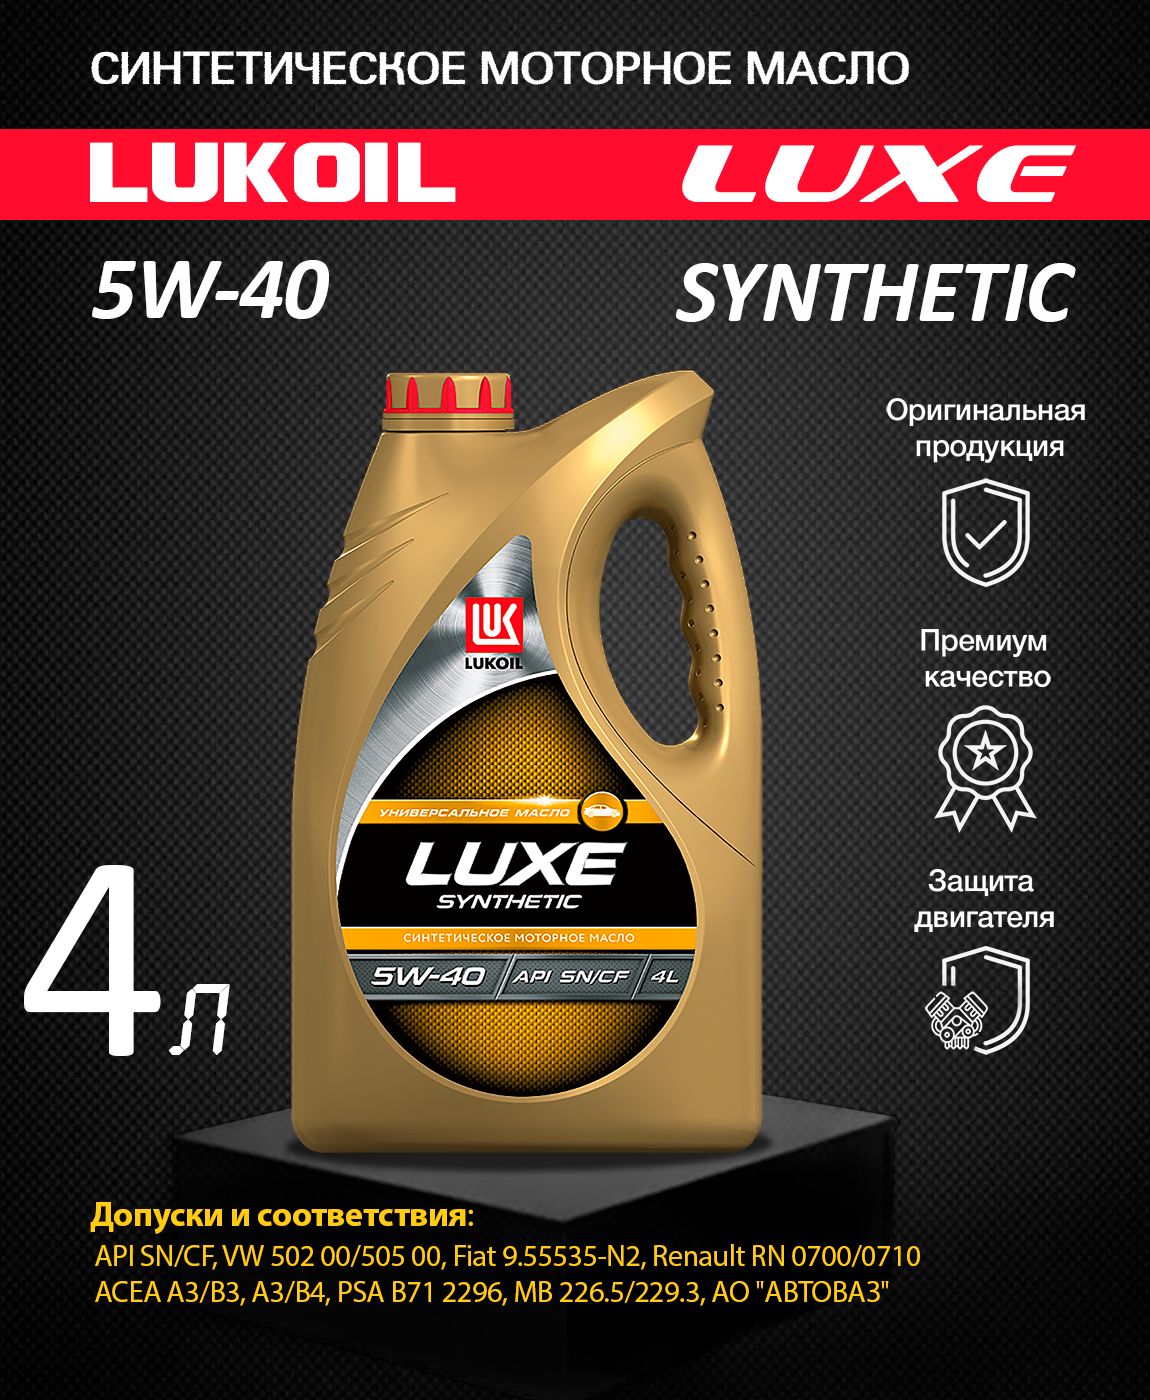 Lukoil Luxe Synthetic 5w-40. Lukoil Luxe Synthetic 5w-40 (ACEA a3/b4-08; API SM/CF). 207465 Лукойл. Автозаправка Лукойл. Масло лукойл люкс 5w40 отзывы